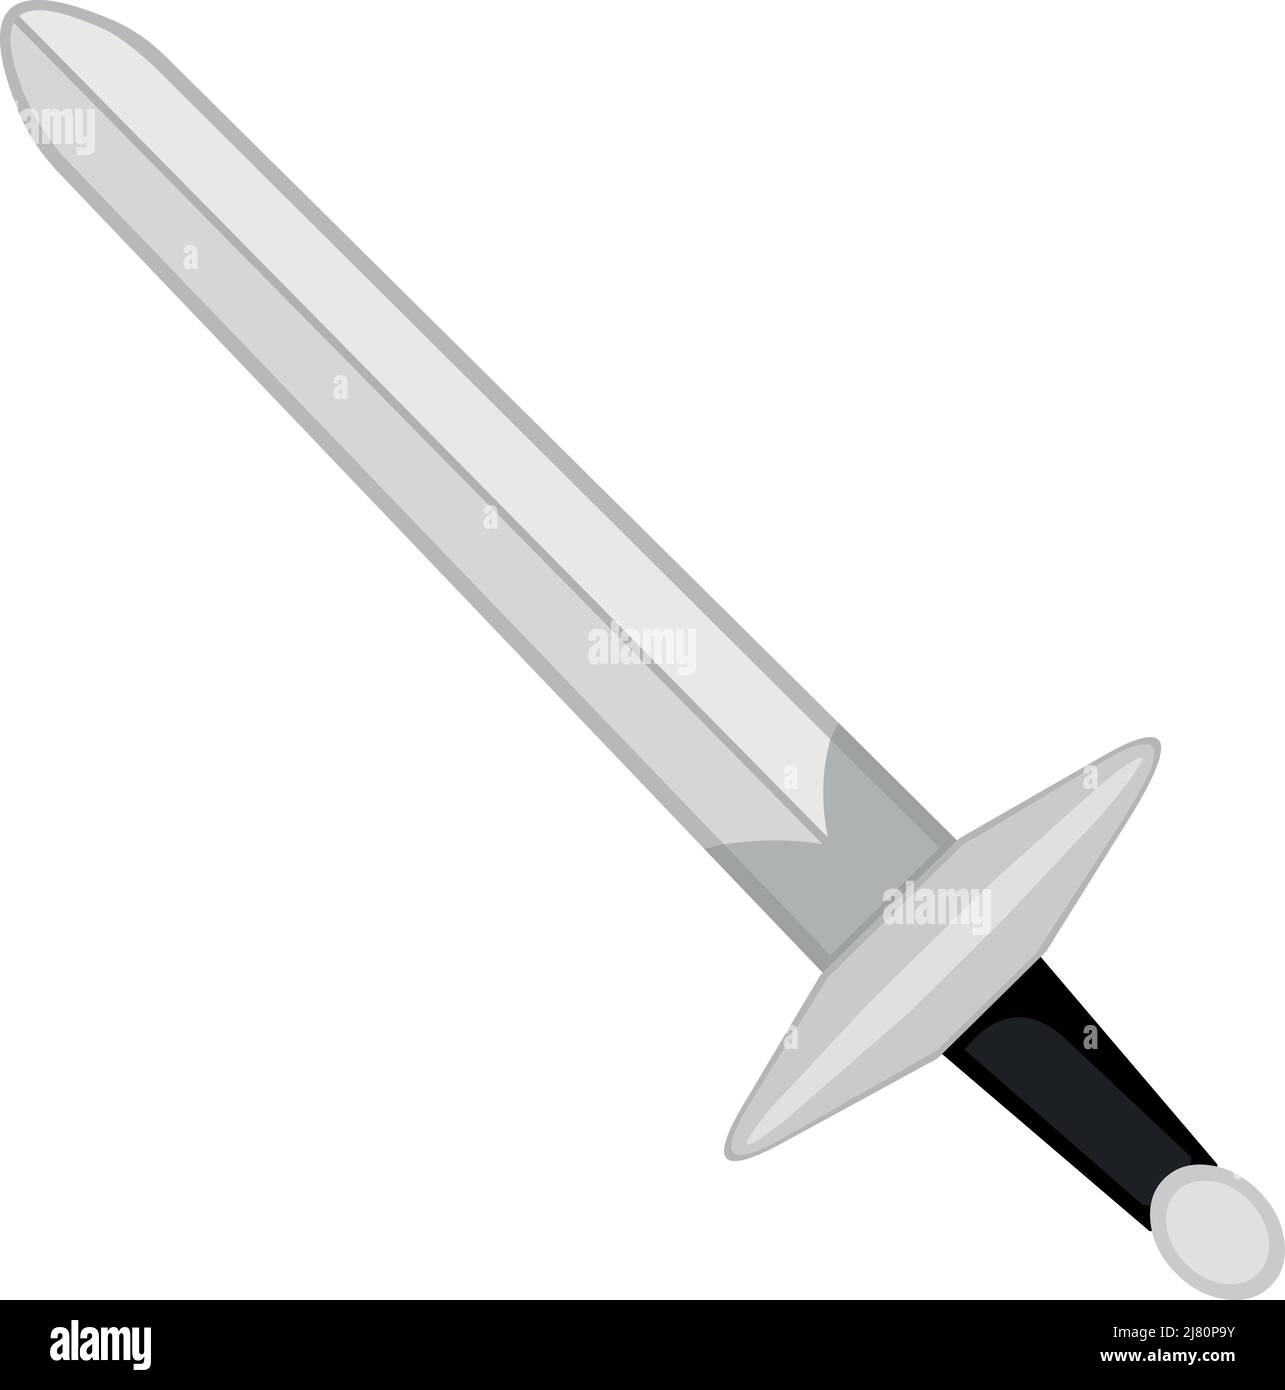 Cross Swords Icon Medieval Knight Weapon Vector Illustration Stock  Illustration - Download Image Now - iStock